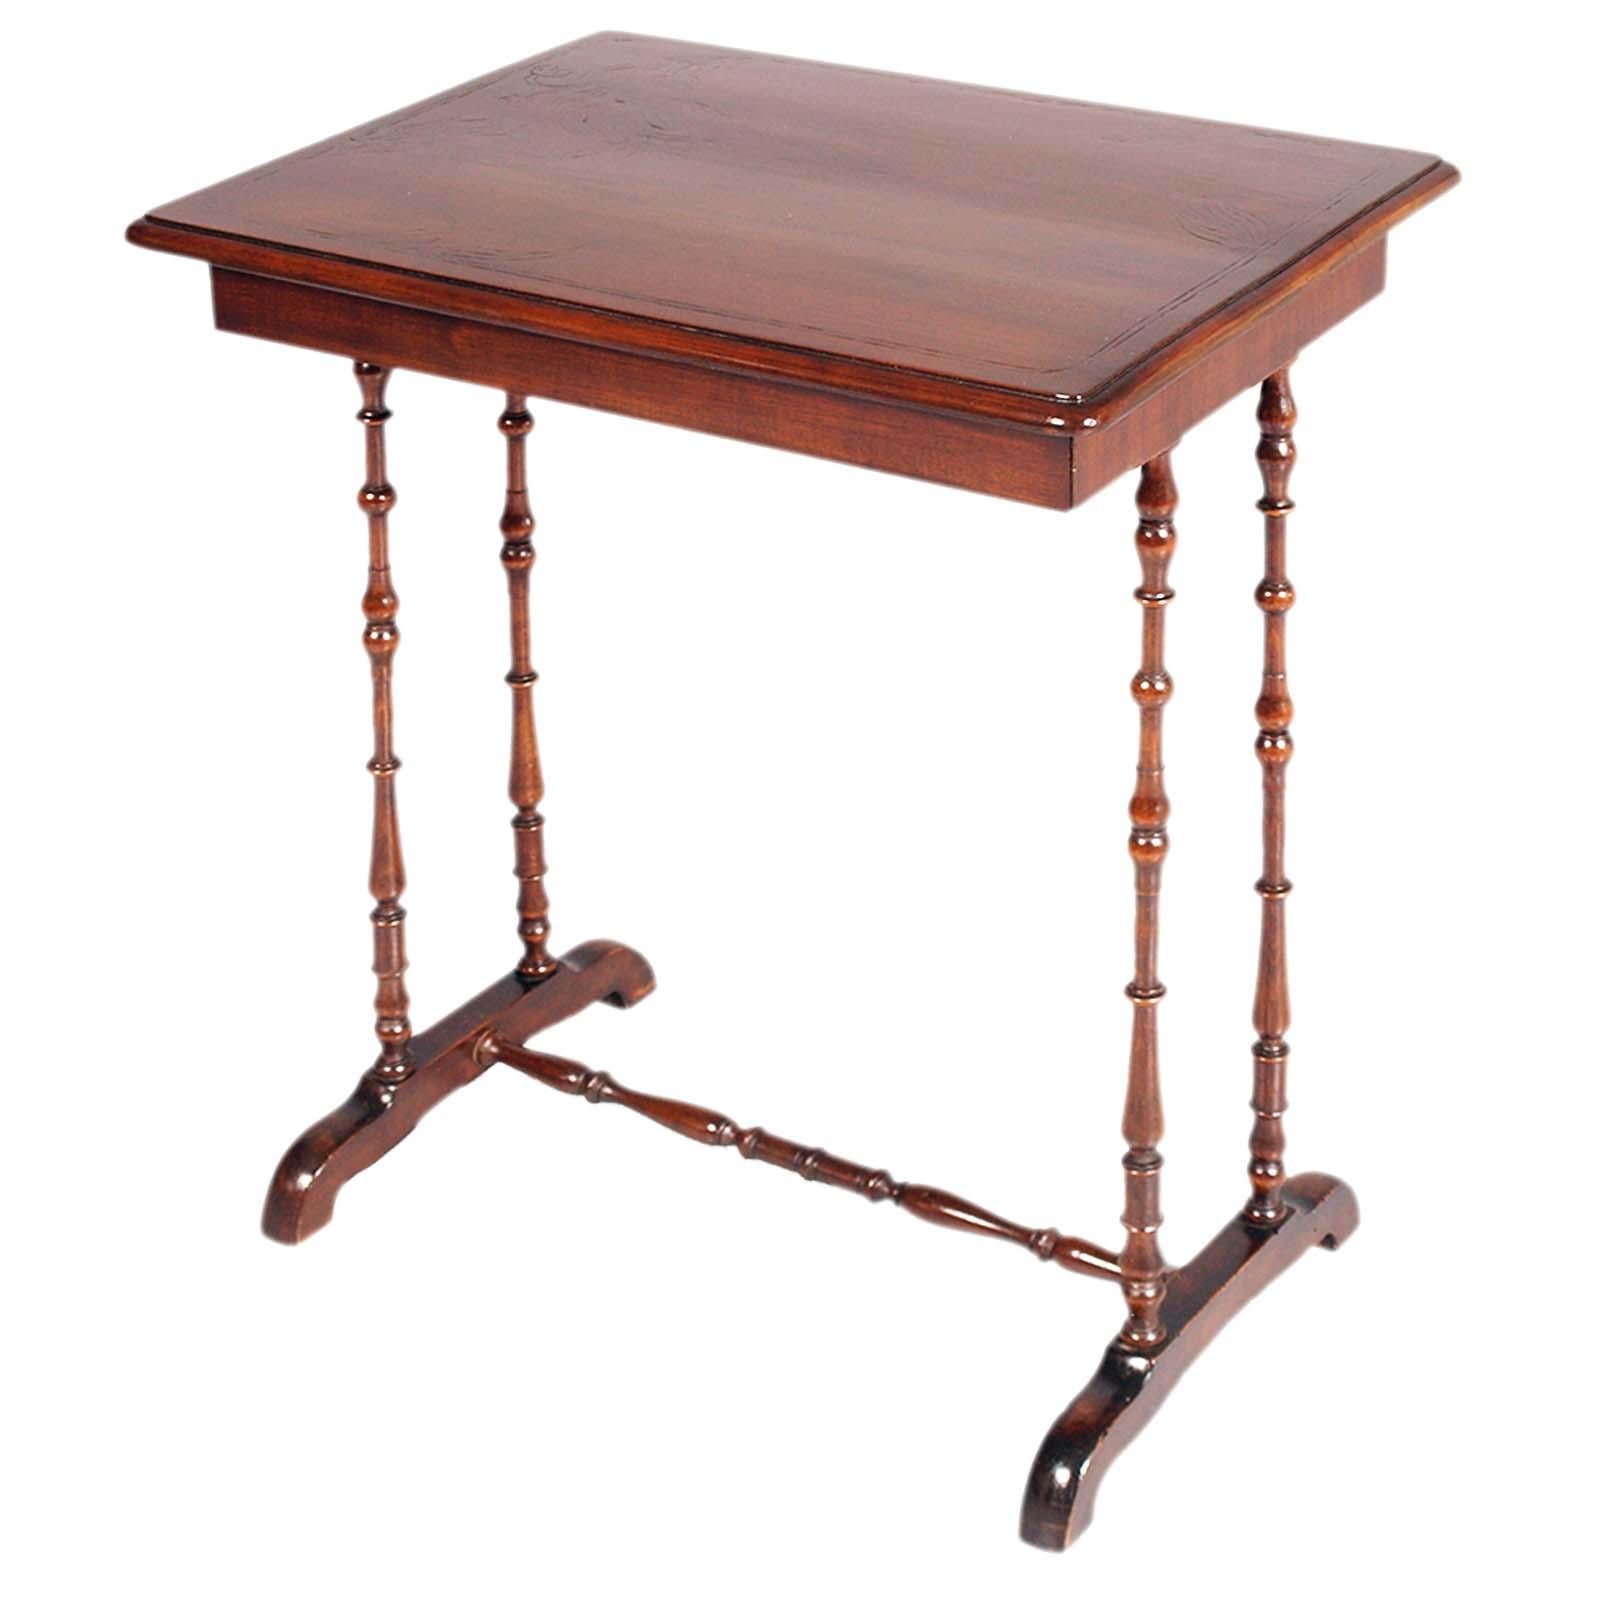 Walnut Antique 19th Century Small Vanity Desk, Work Table, Louis XIII style in walnut For Sale